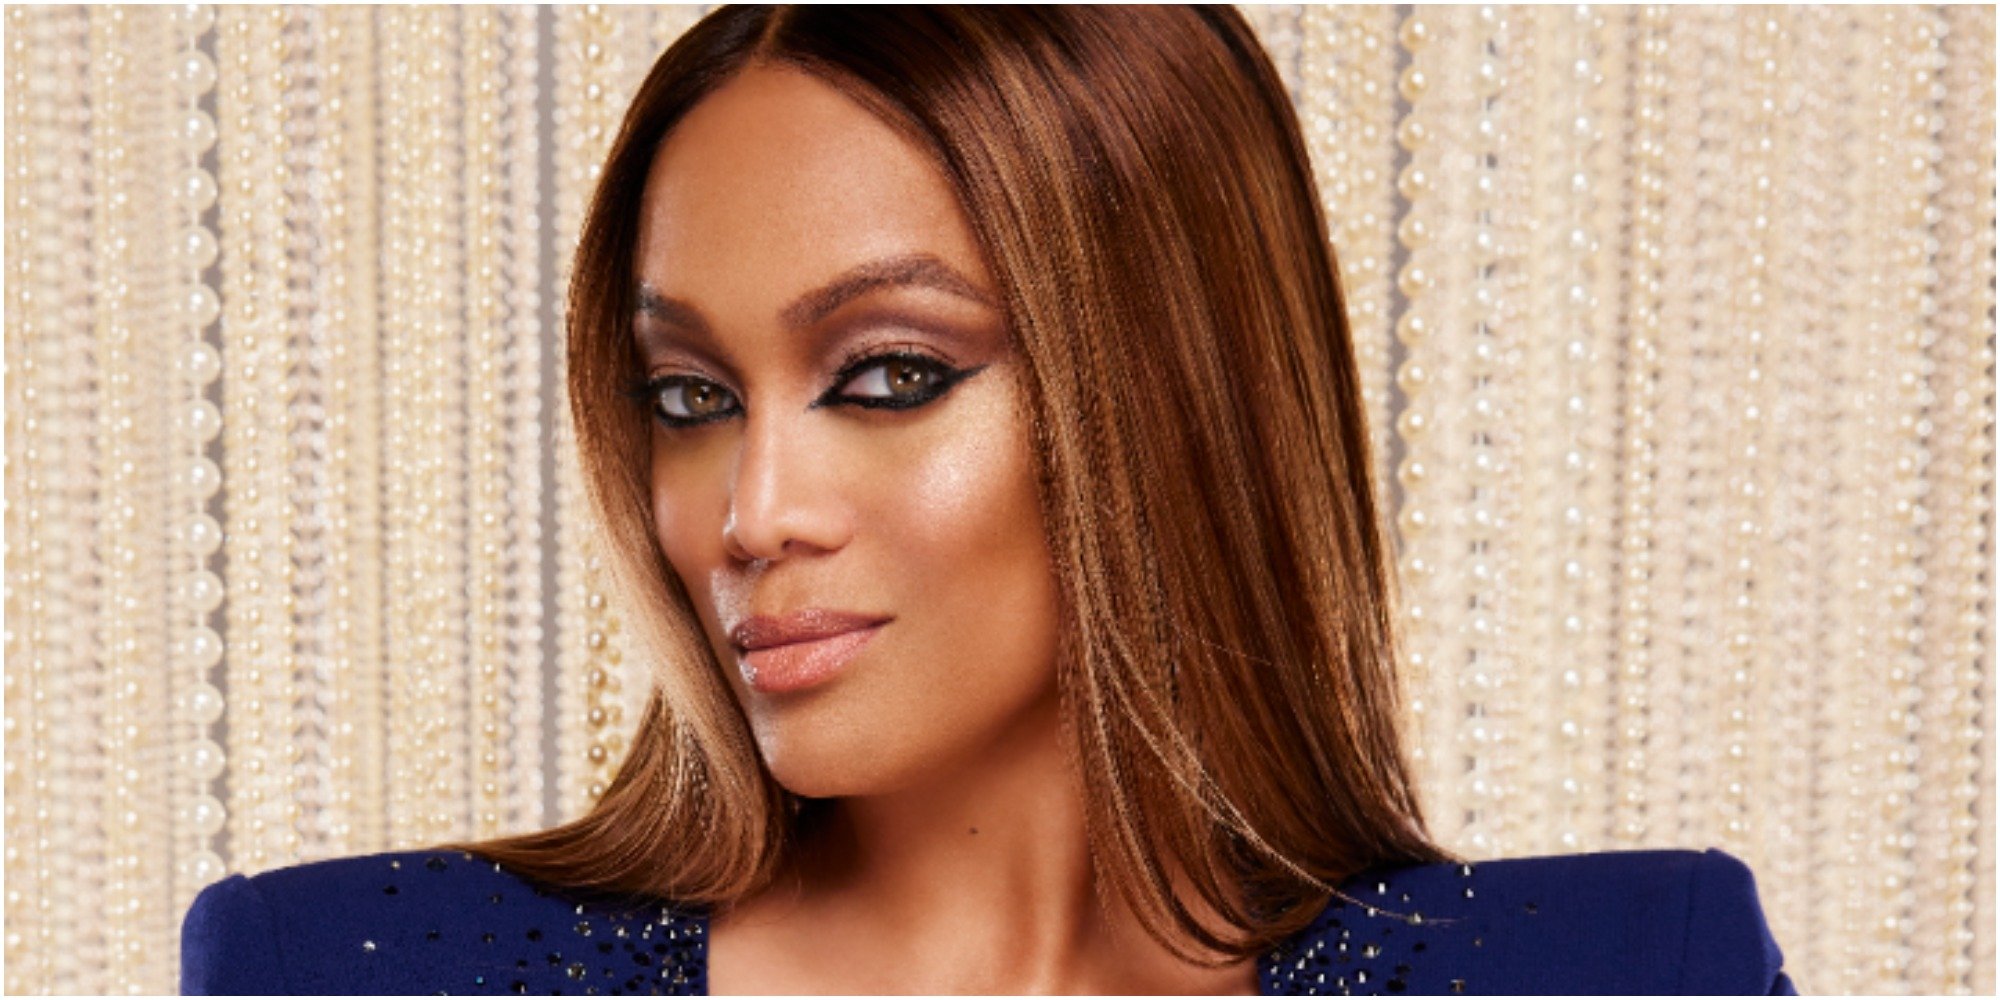 Tyra Banks continues to draw fan ire "Dancing with the stars" that they don't want to see on the show.